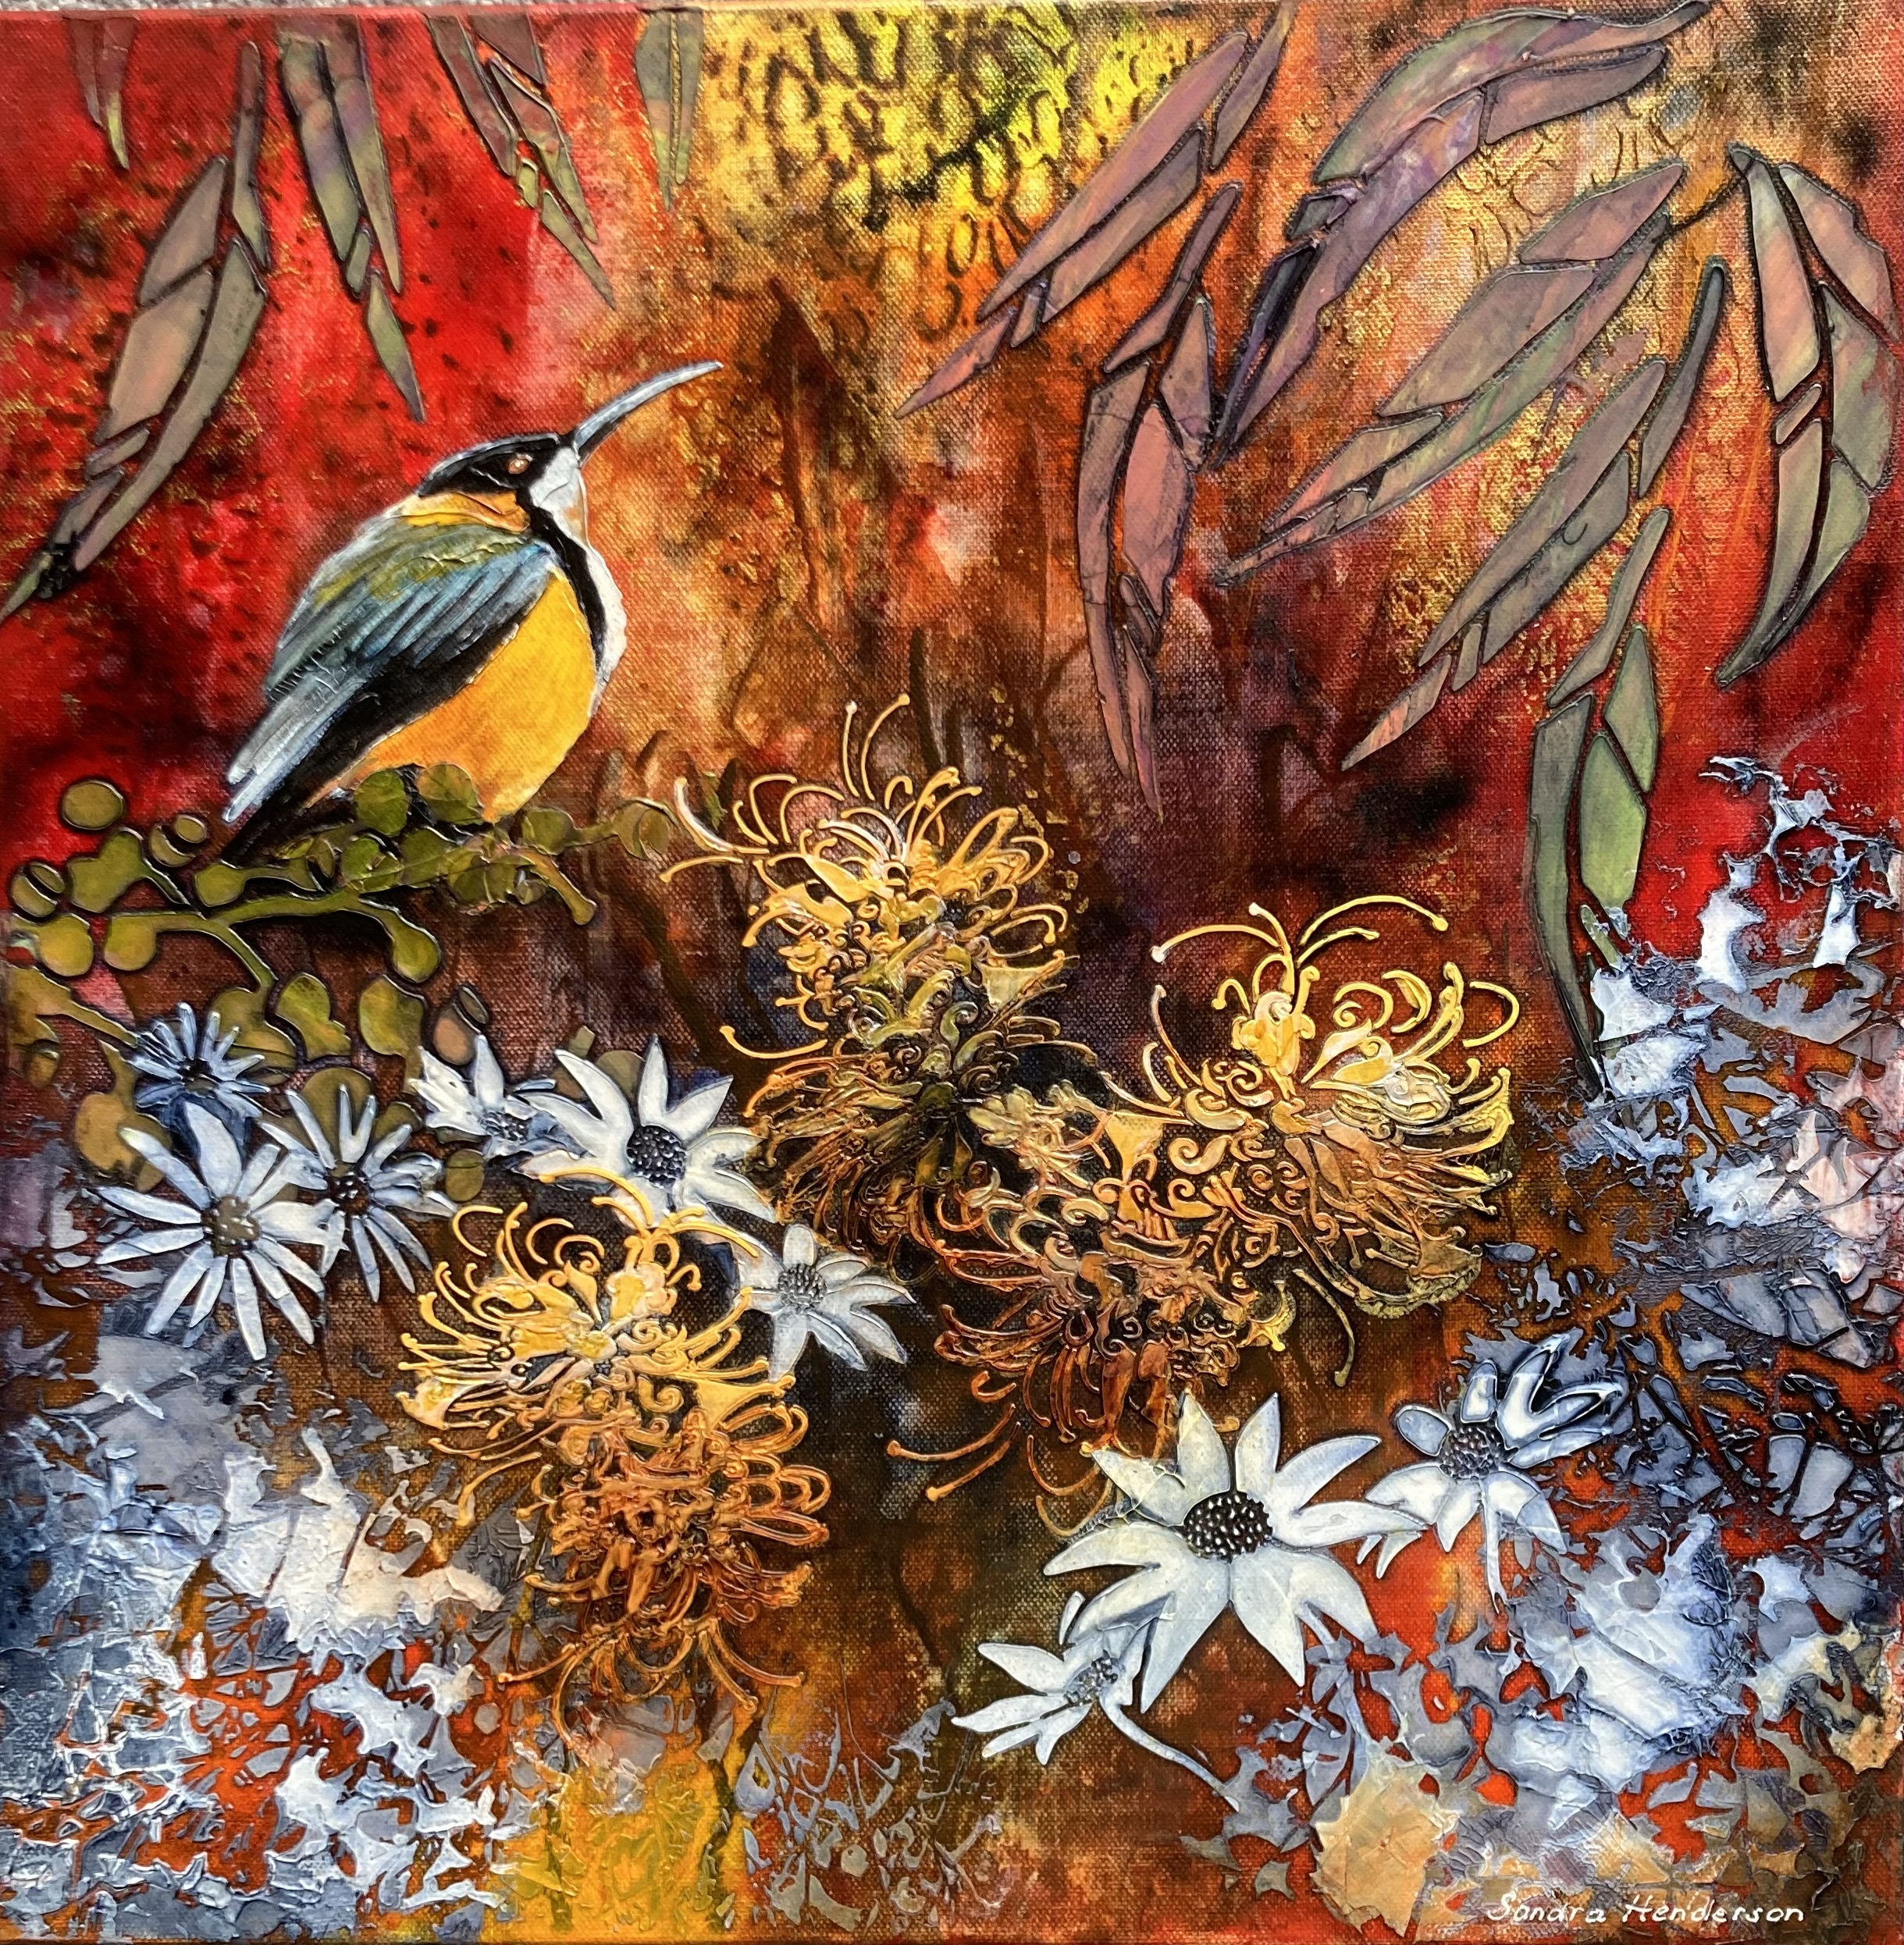 Image shows a mixed media painting in autumn tones showing flannel flowers, proteas, an eastern spine bill bird for the Exhibition news Scottsdale art gallery cafe Showcases the Vibrant Autumn Exhibition Art Trails Tasmania